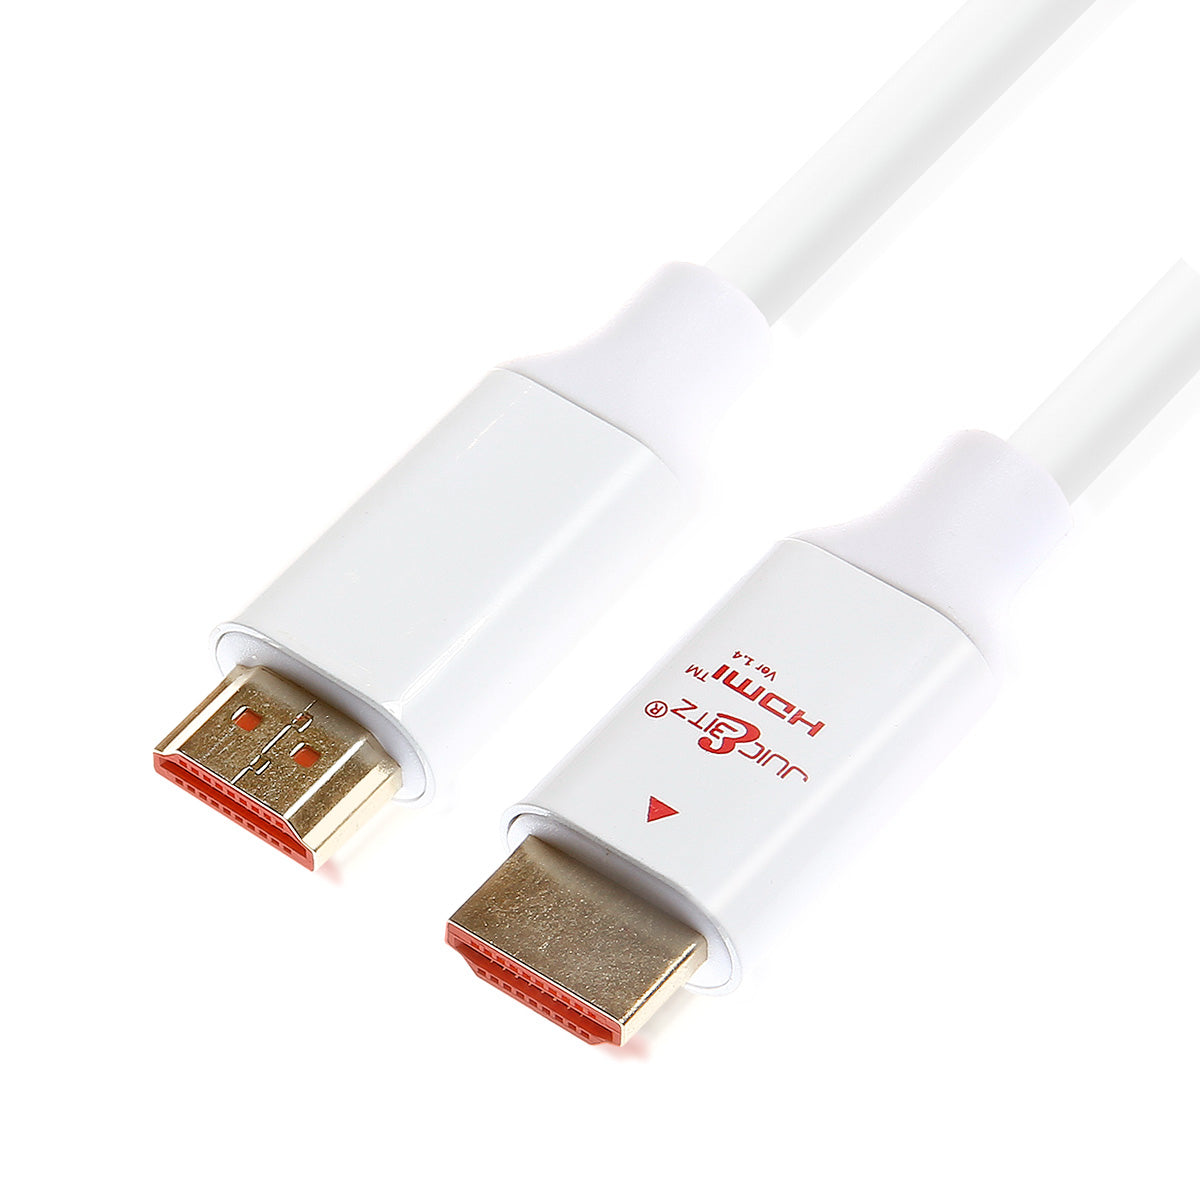 HDMI 1.4 Full HD HDMI Cable with Ethernet, CEC, ARC - White